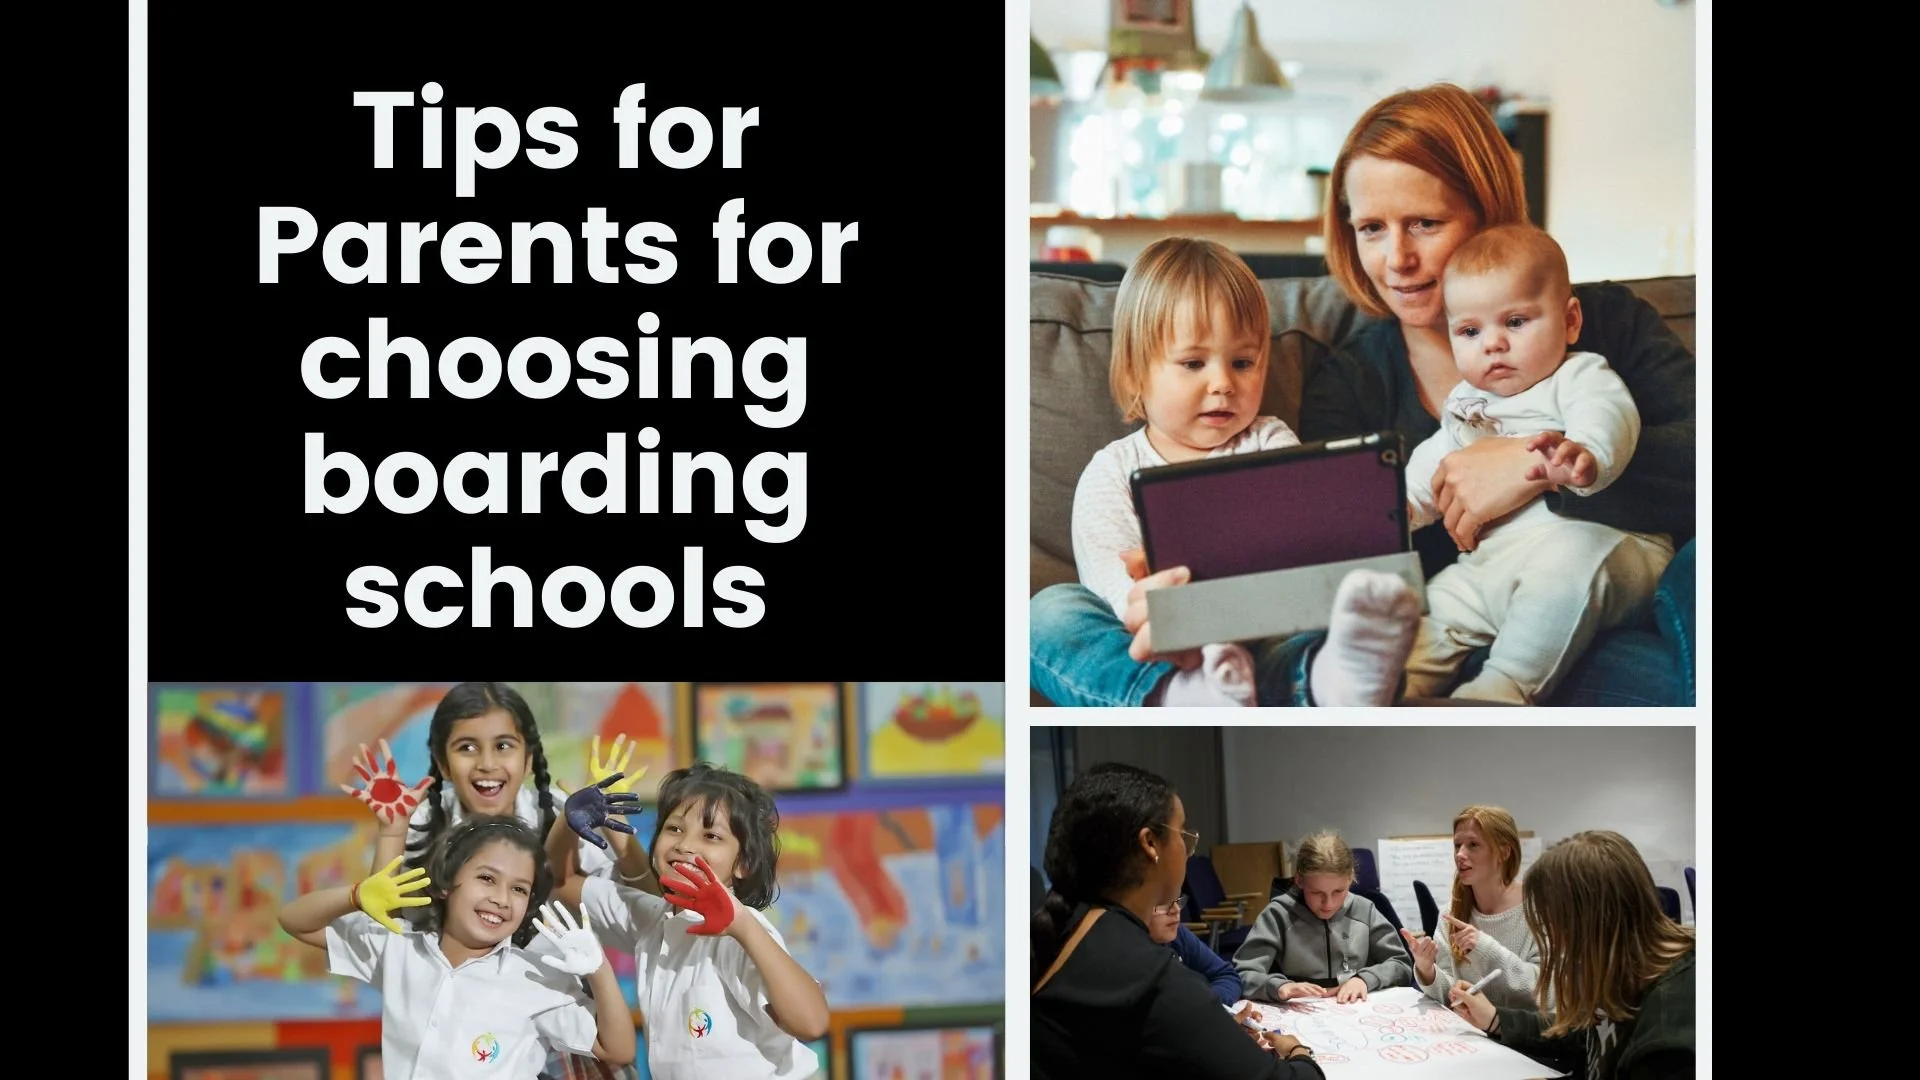 Tips for Parents for choosing boarding schools